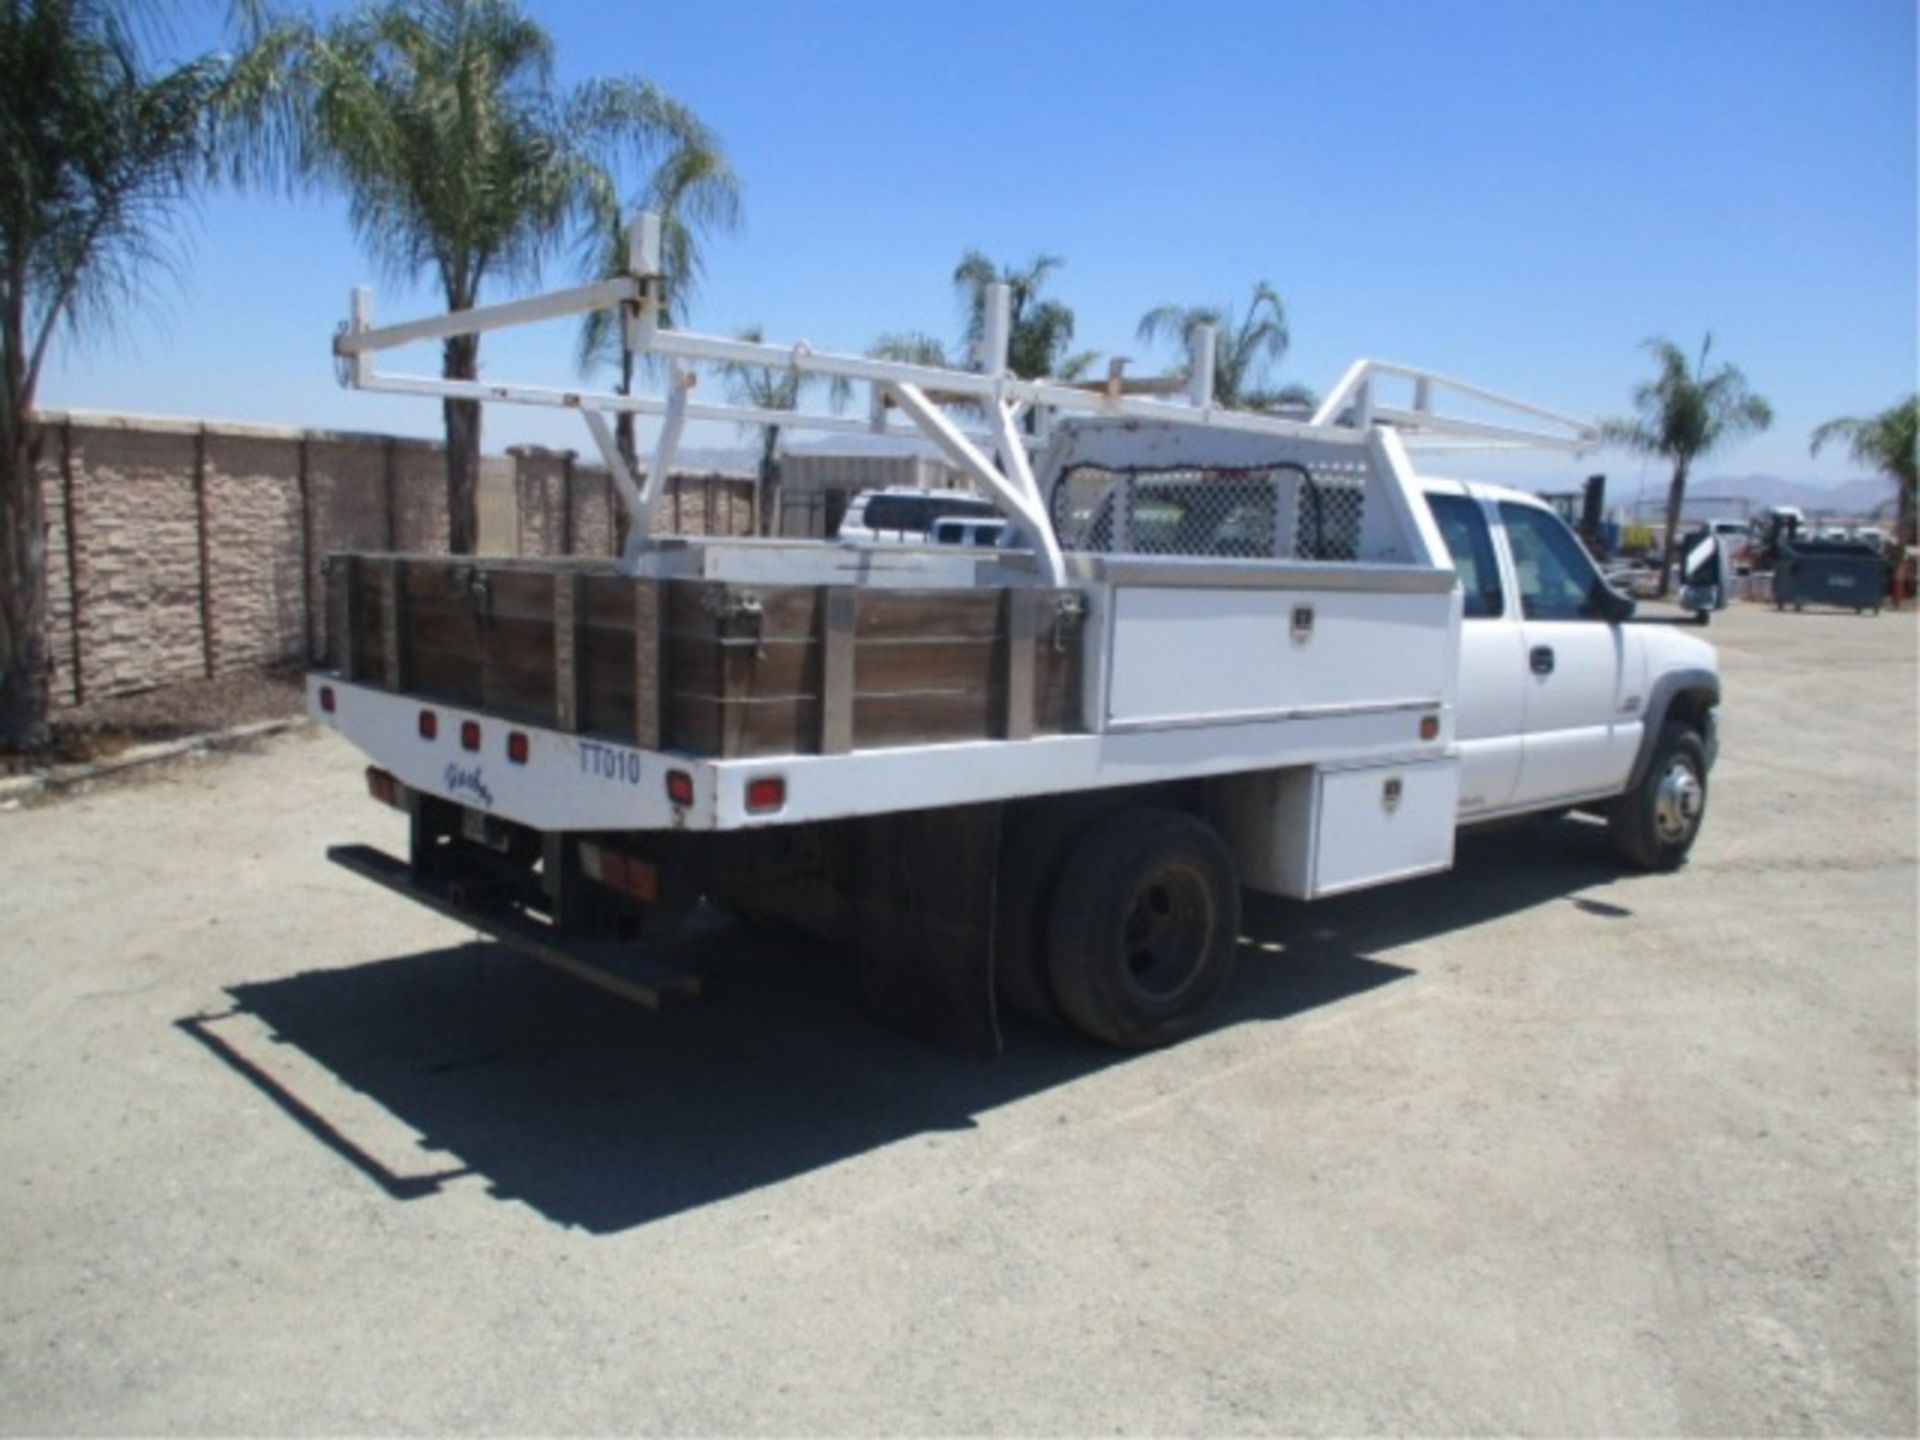 2006 Chevrolet 3500 Extended-Cab Utility Truck, 6.6L Turbo Diesel, Automatic, Tool Boxes, Lumber - Image 16 of 71